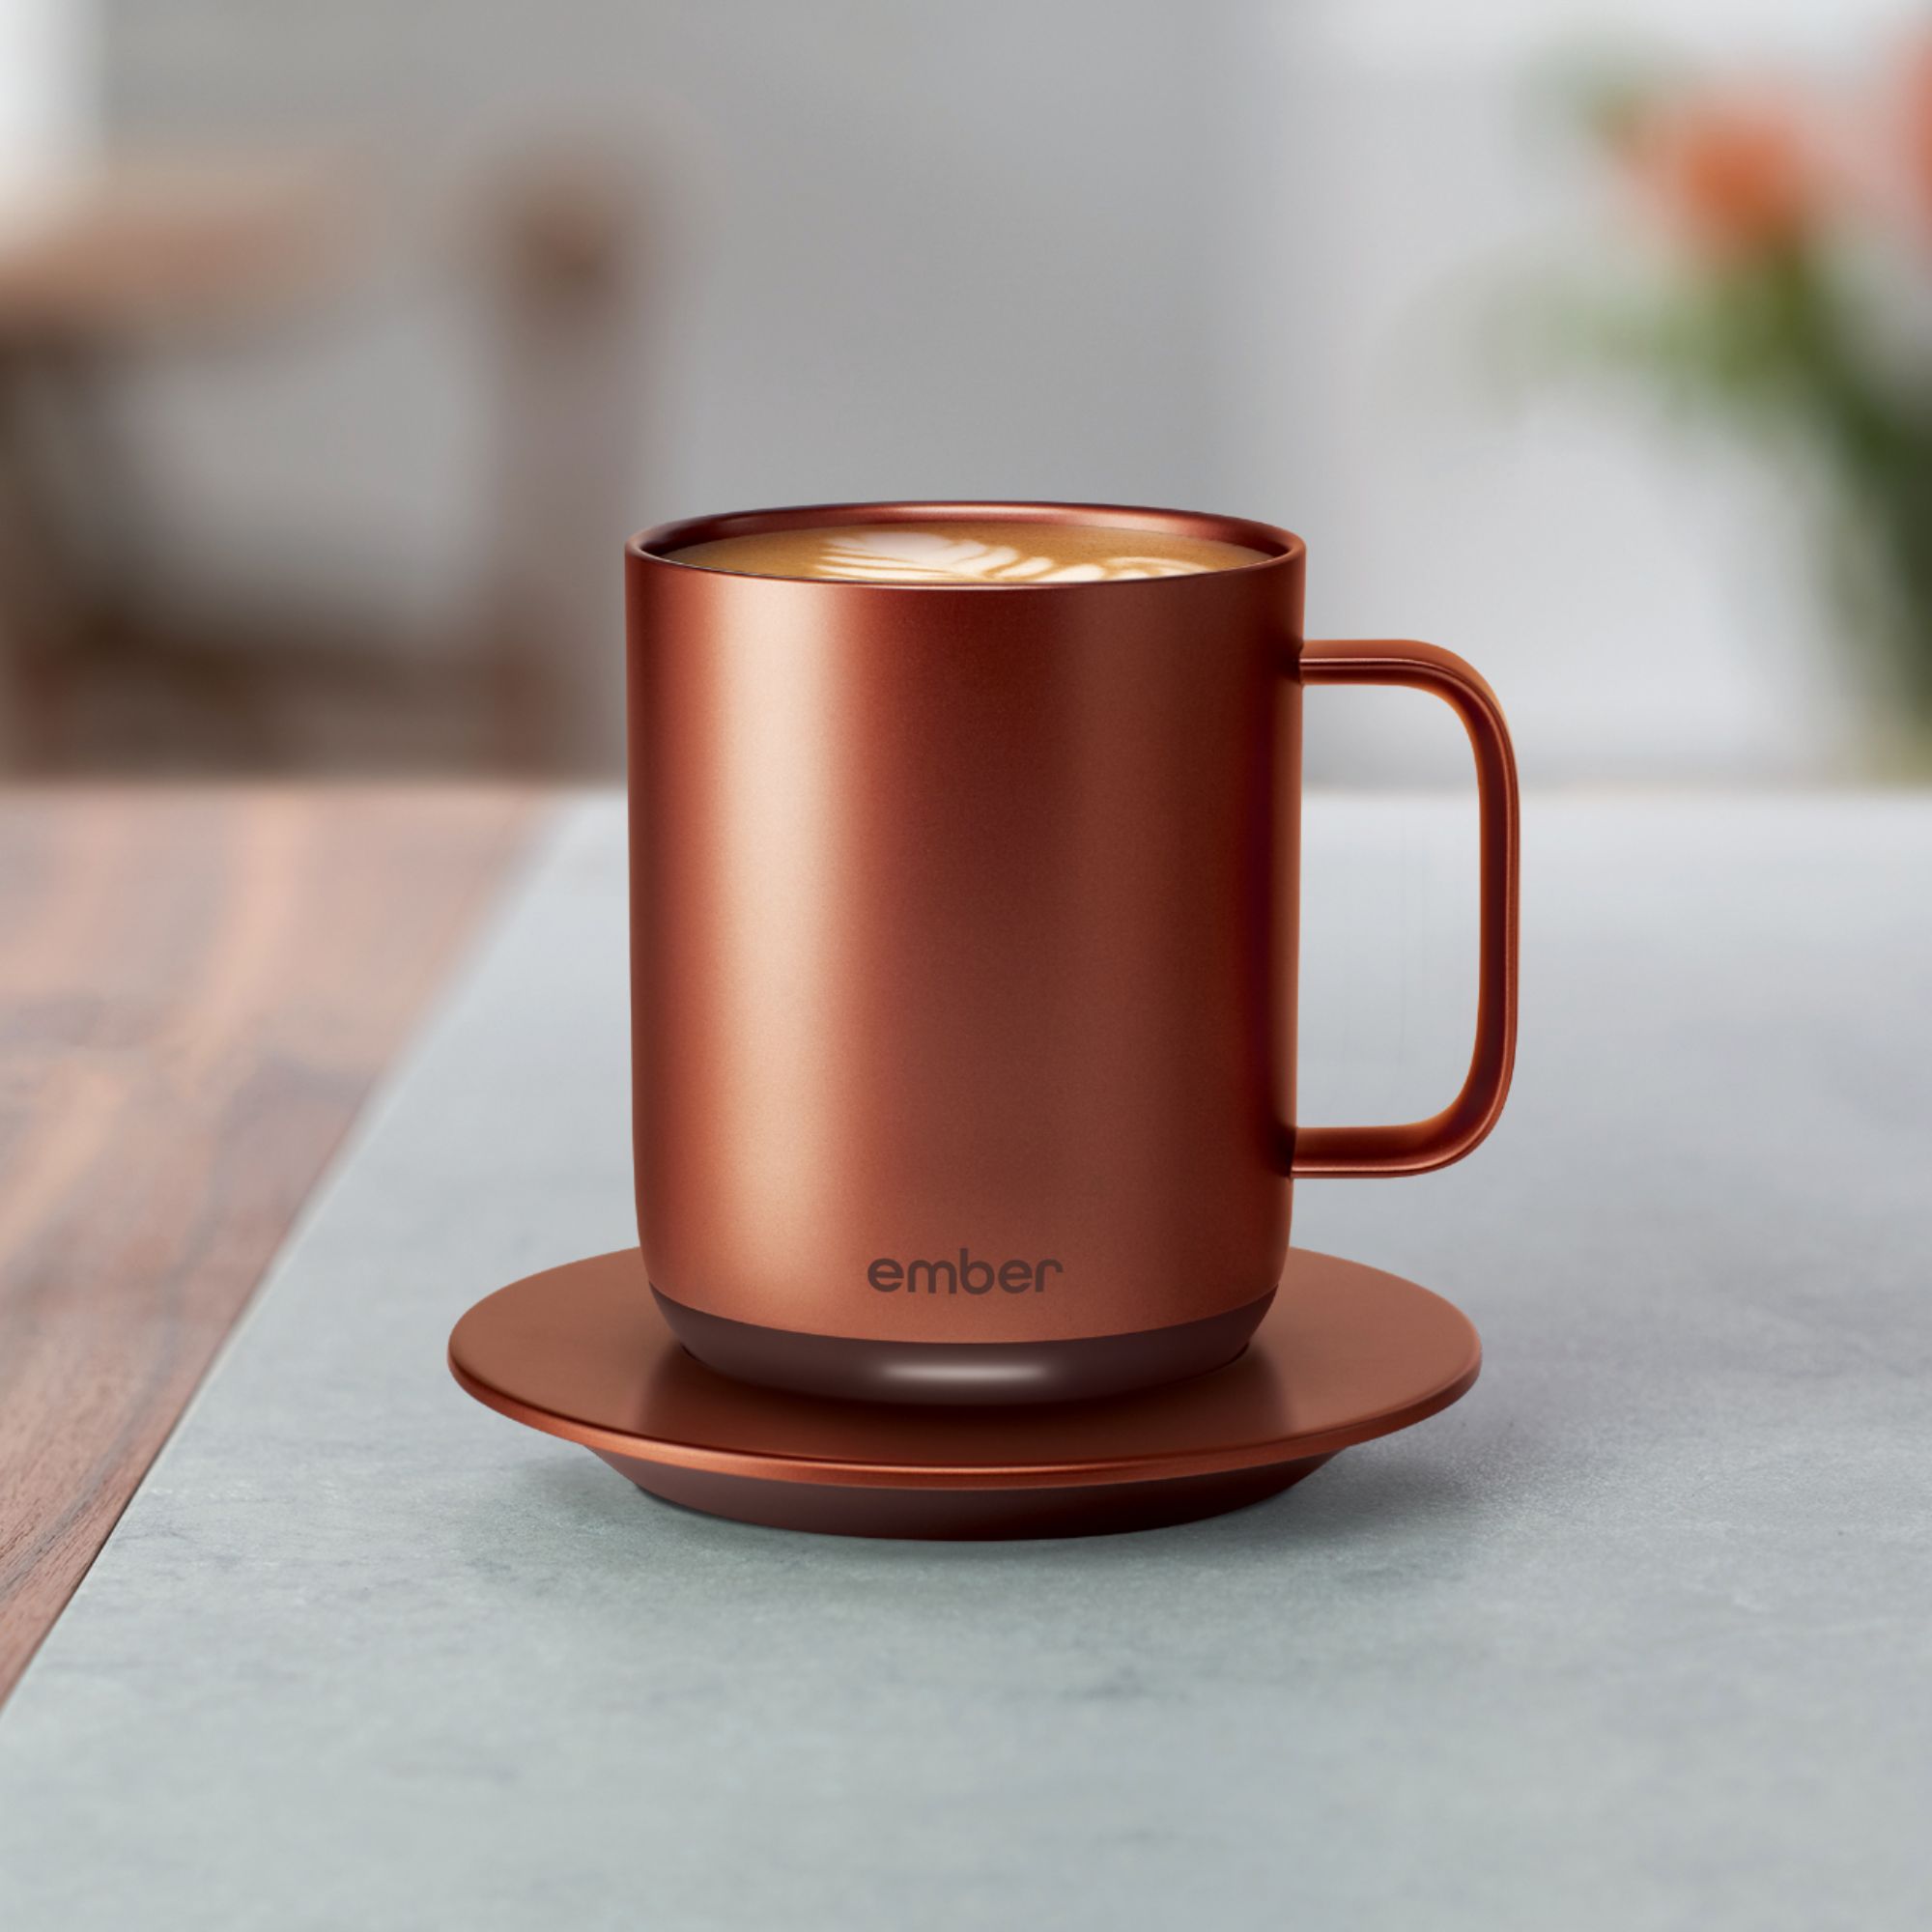 Lakeland on X: Win 1 of 3 Ember Temperature Controlled Mugs worth